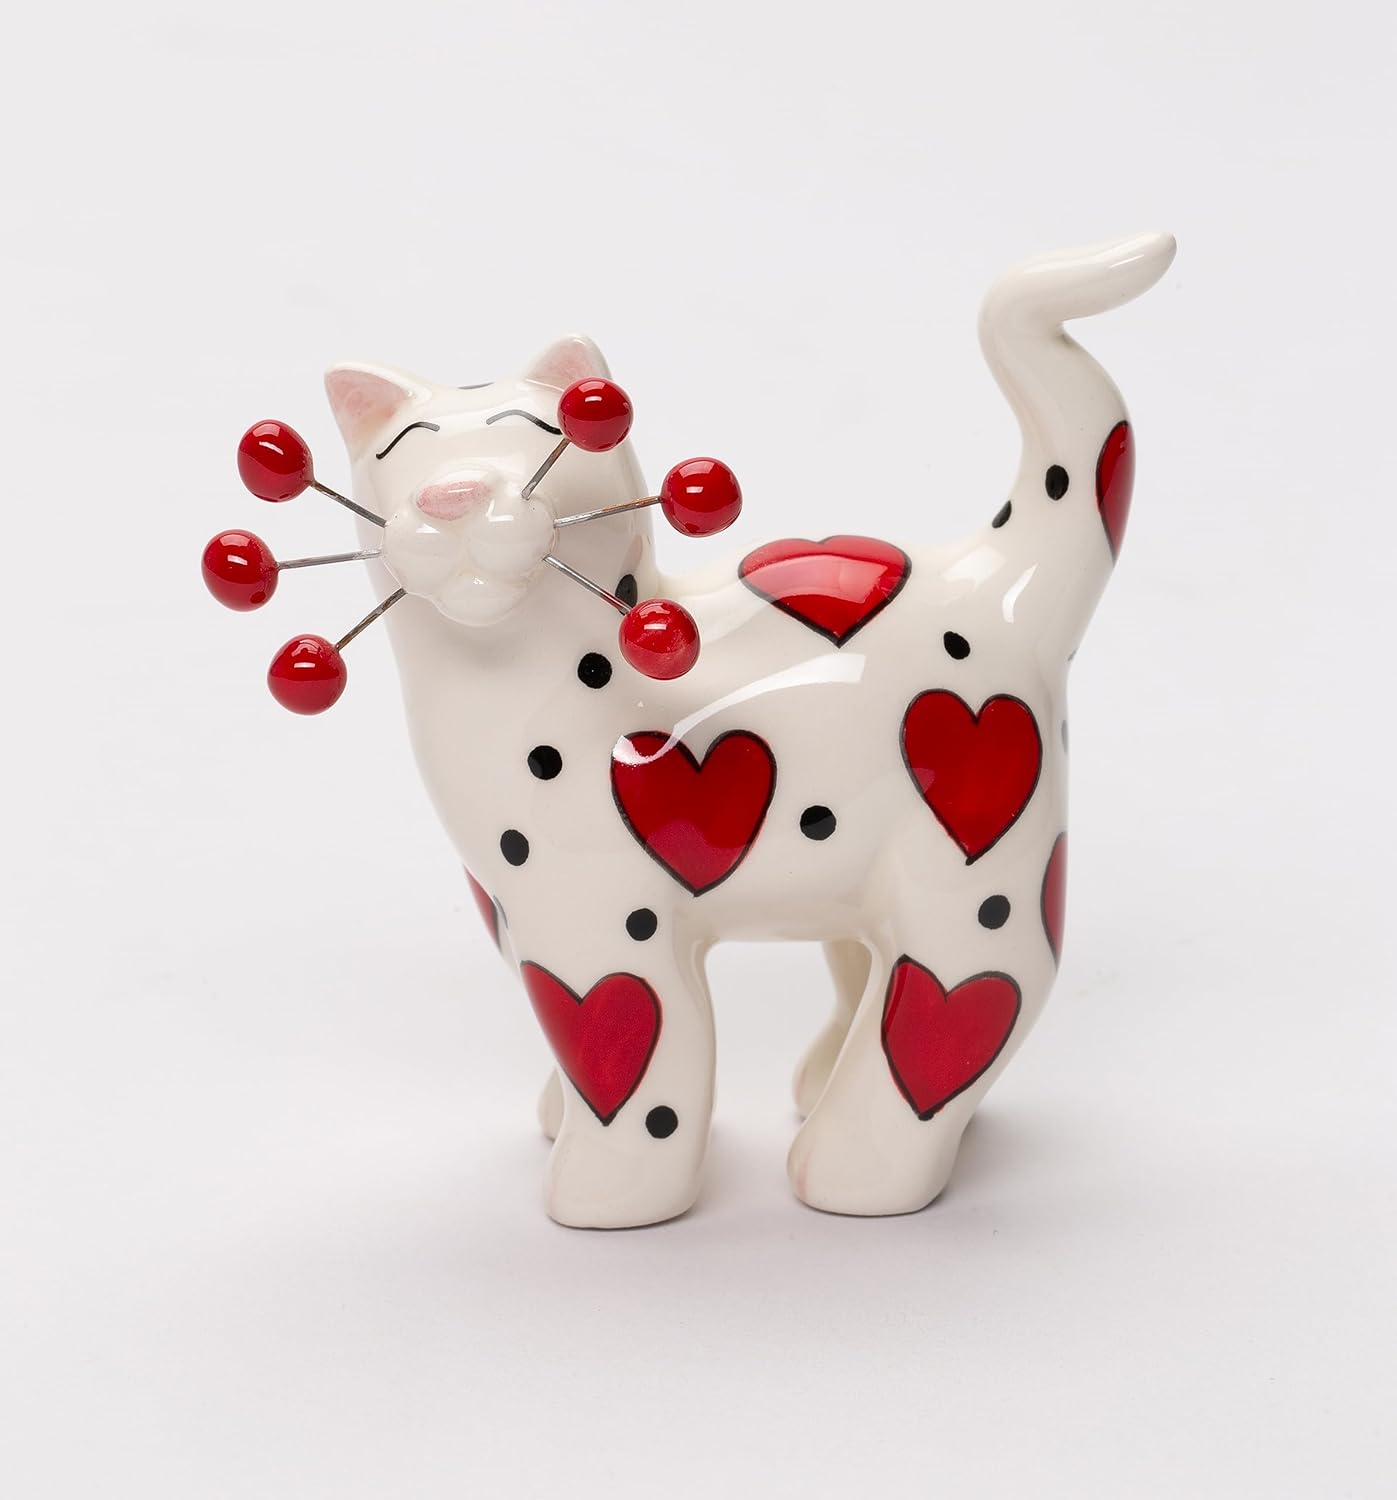 Cosmos Gifts Fine Ceramic Amy Lacombe Valentine Whisker Cat with Red Hearts Figurine